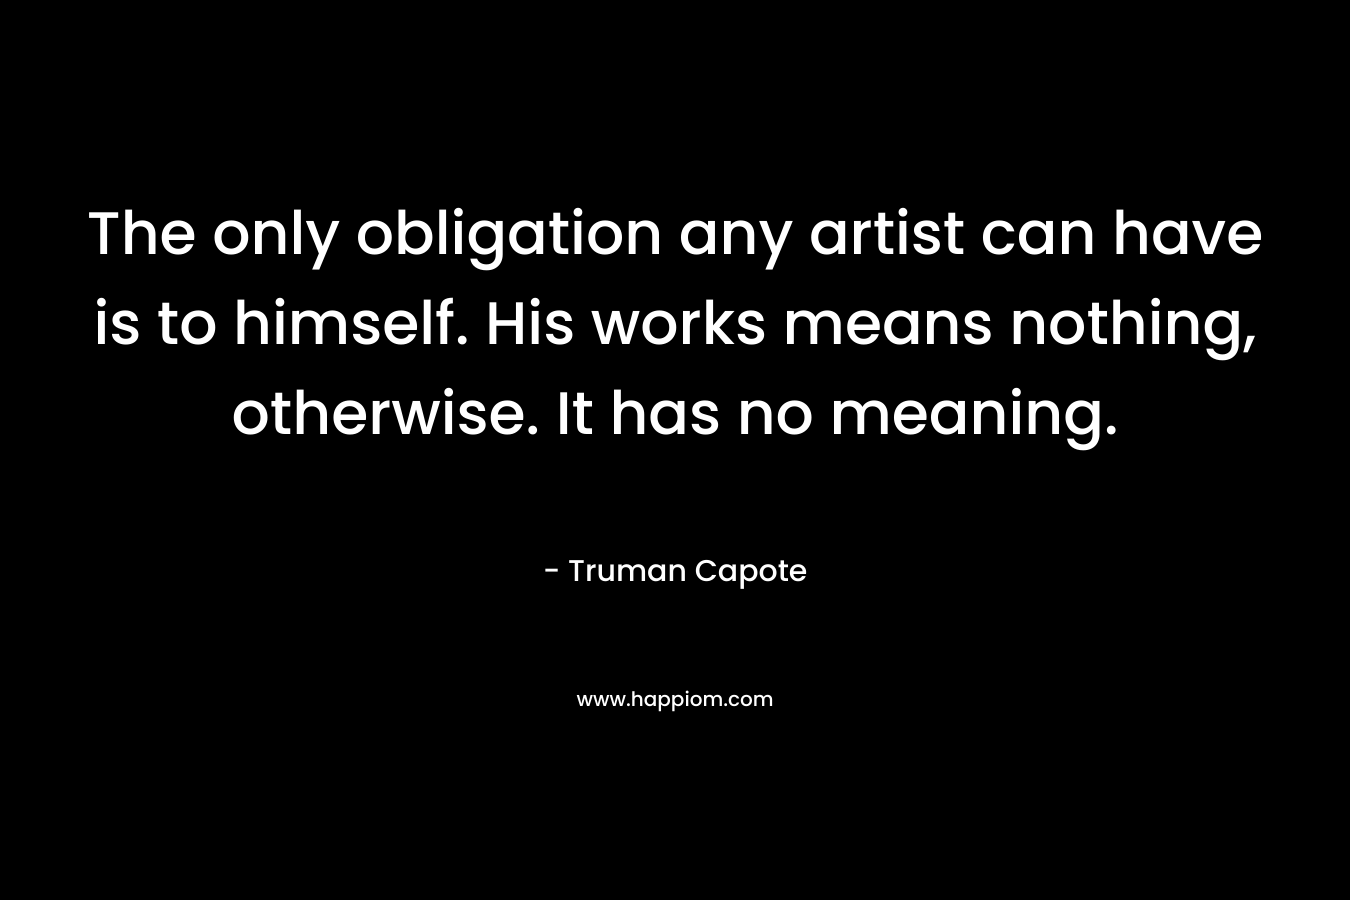 The only obligation any artist can have is to himself. His works means nothing, otherwise. It has no meaning. – Truman Capote